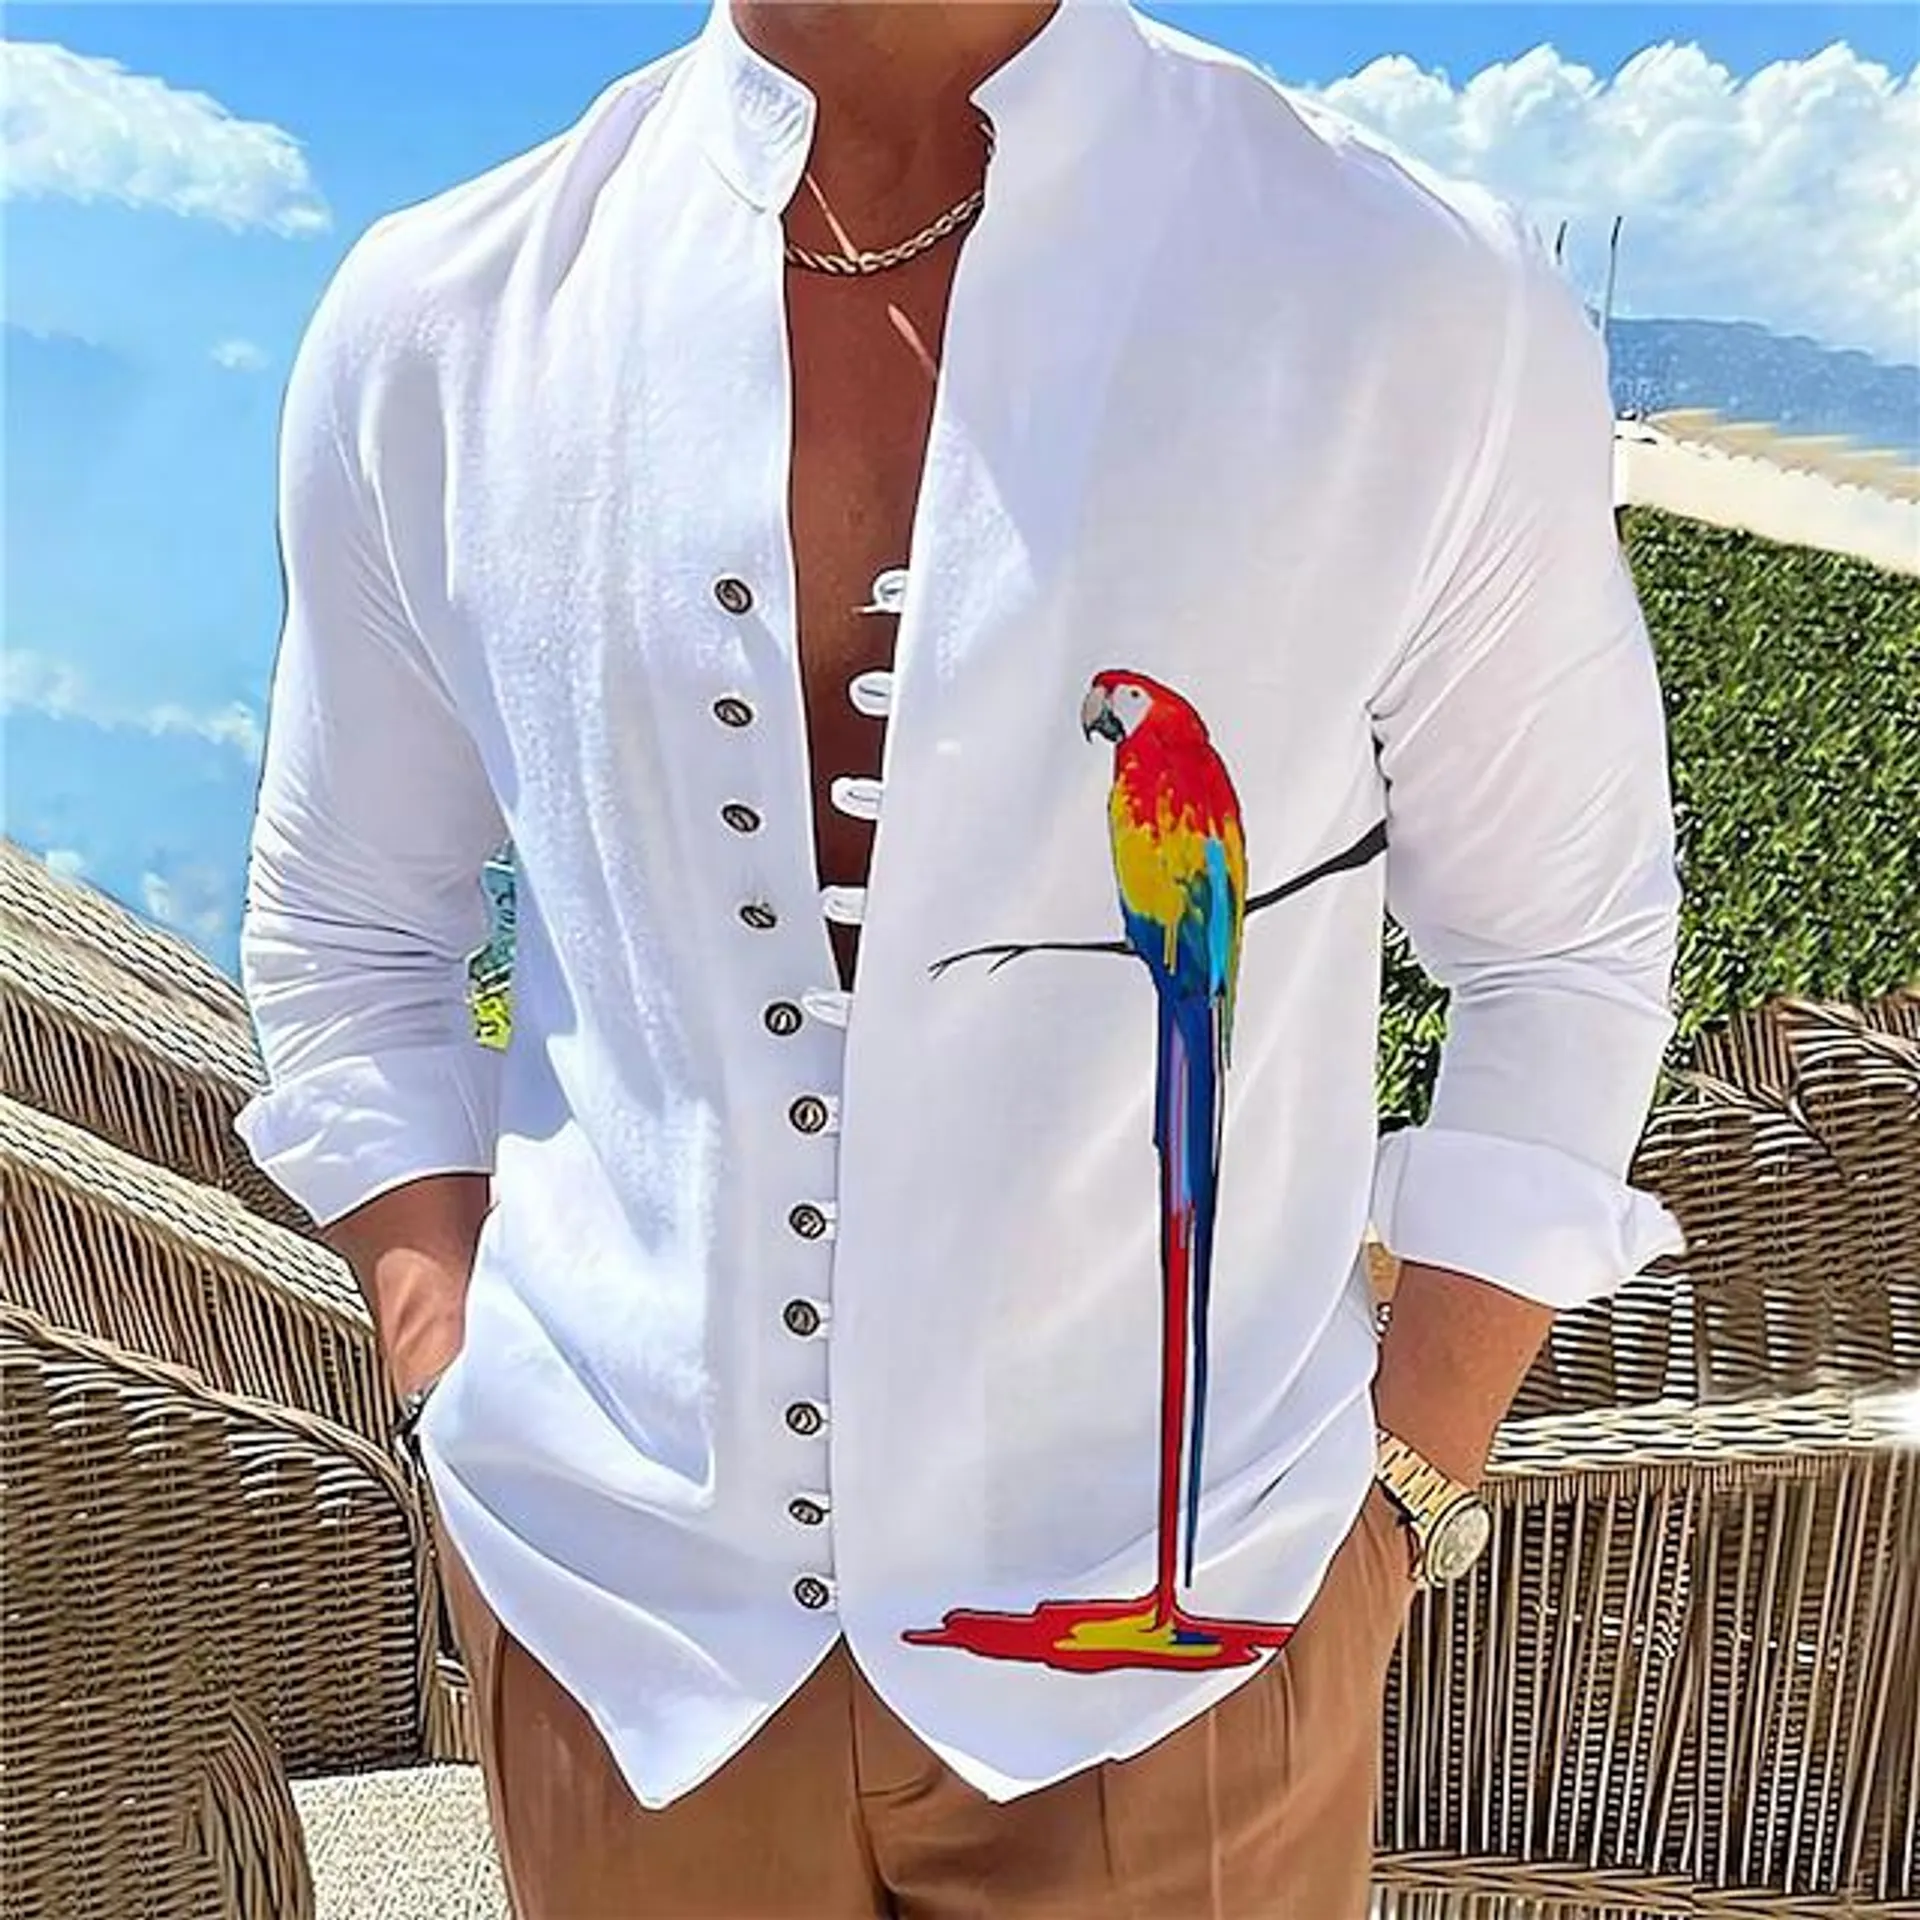 Men's Shirt Graphic Prints Parrot Stand Collar White Blue Blue / White White+Gray Brown Outdoor Street Long Sleeve Print Clothing Apparel Fashion Designer Casual Comfortable